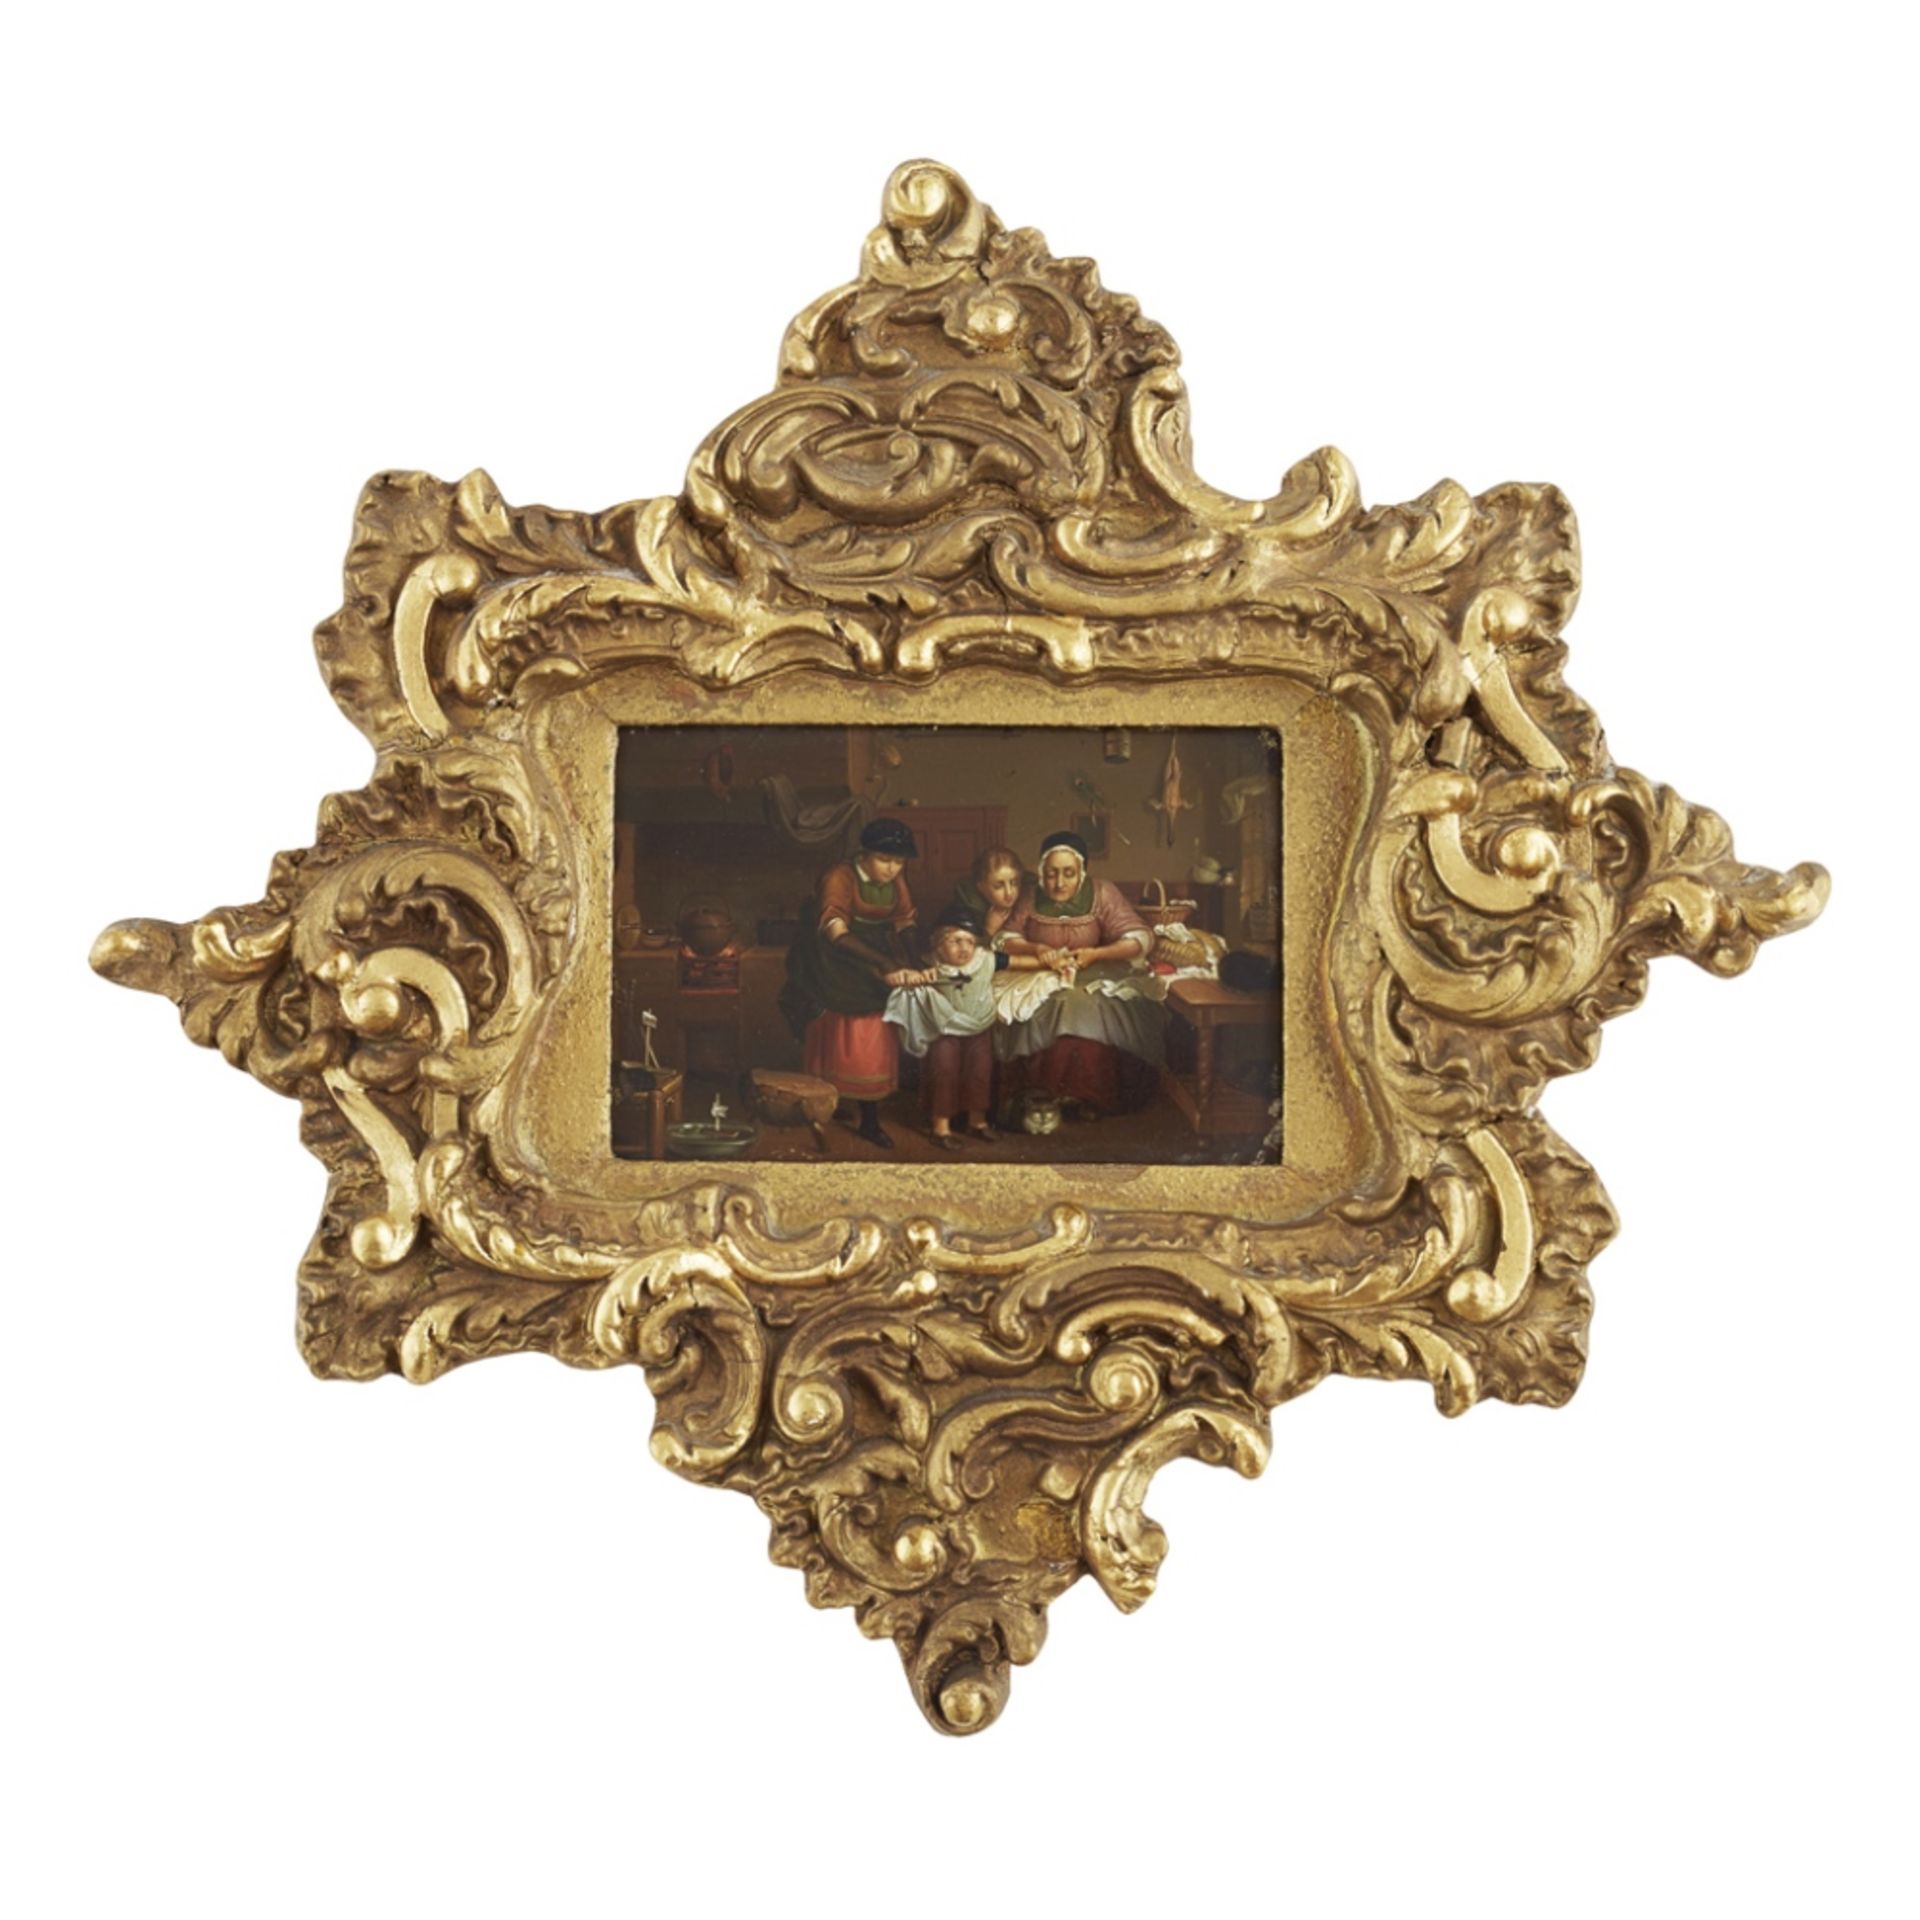 MINIATURE PAINTING, AFTER DAVID WILKIE THE CUT FINGER oil on a tin box cover, in a giltwood and